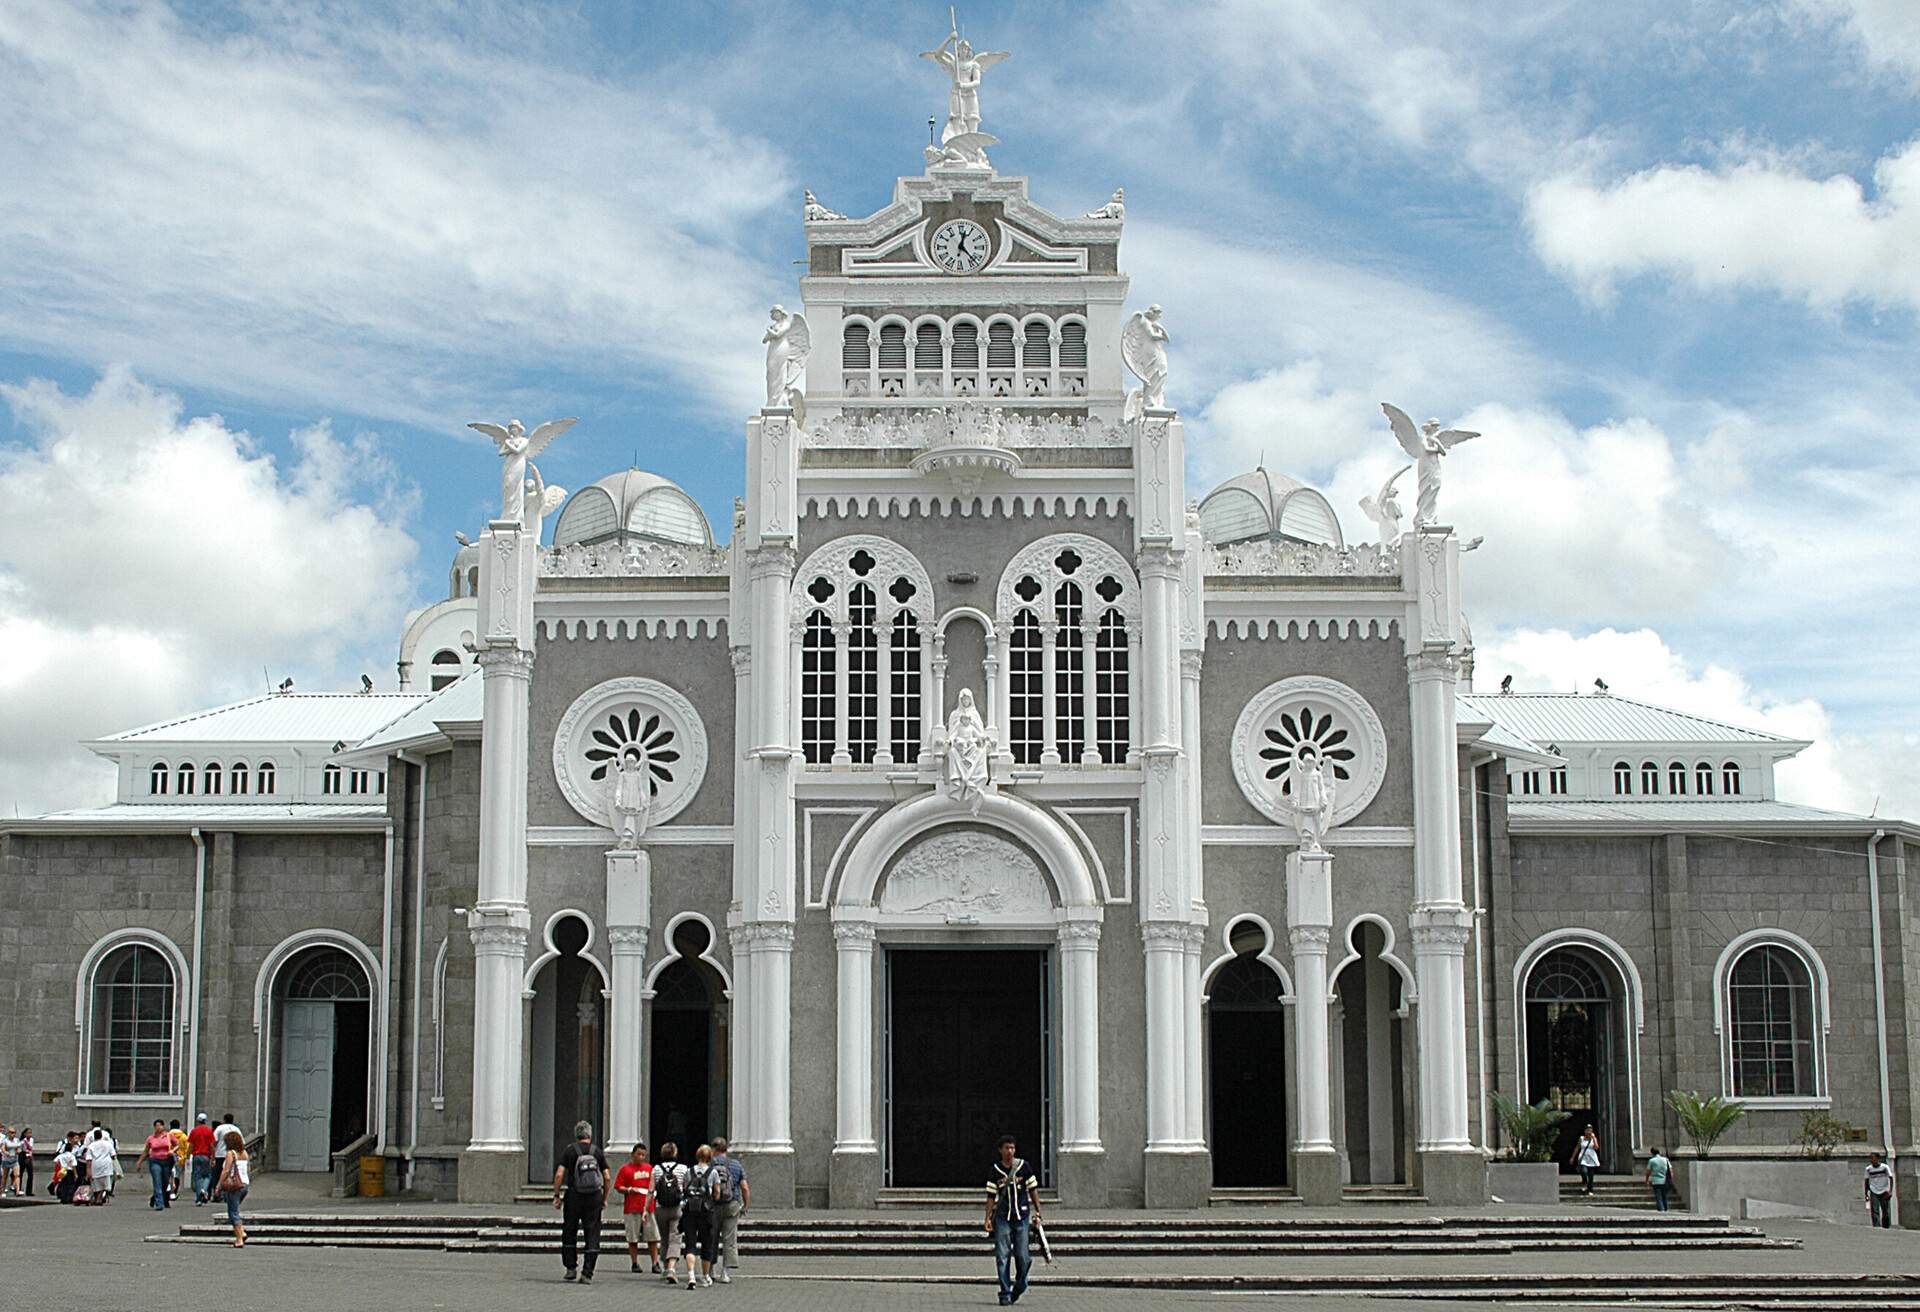 DEST_COSTA-RICA_CARTAGO_OUR-LADY-OF-THE-ANGELS-BASILICA_GettyImages-1161604232